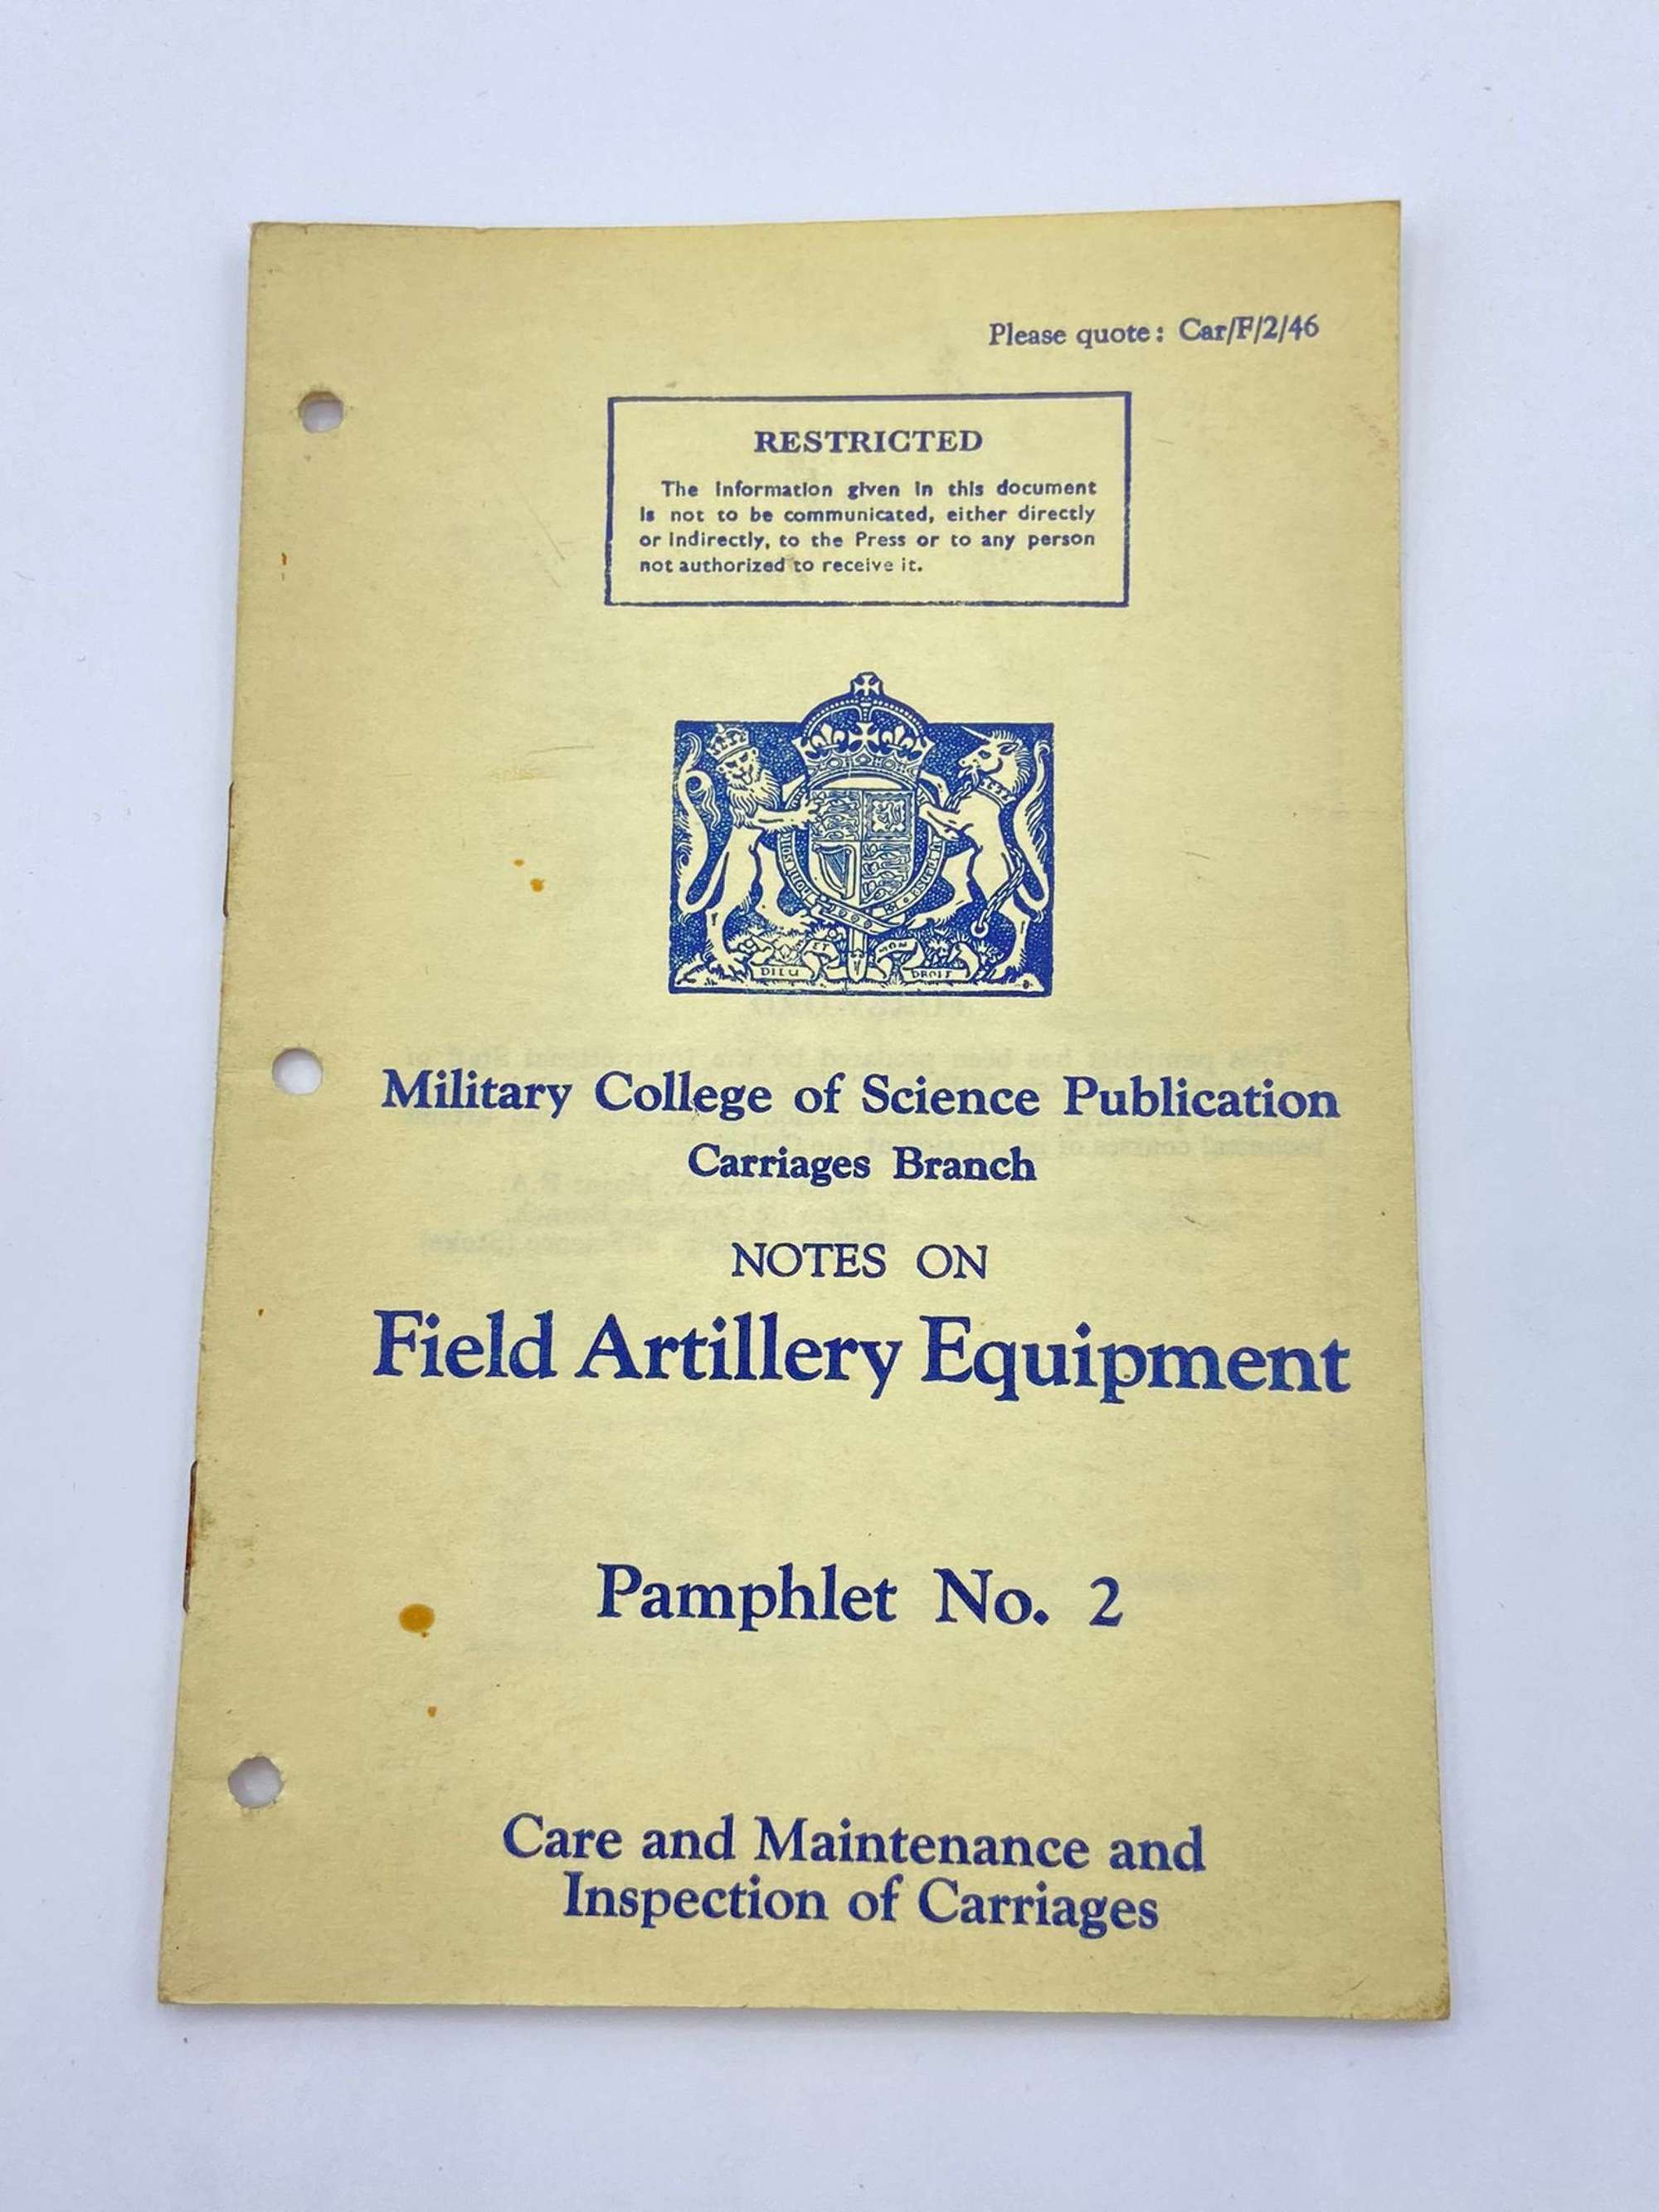 WW2 Military College Of Science Publication Inspection Of Carriages